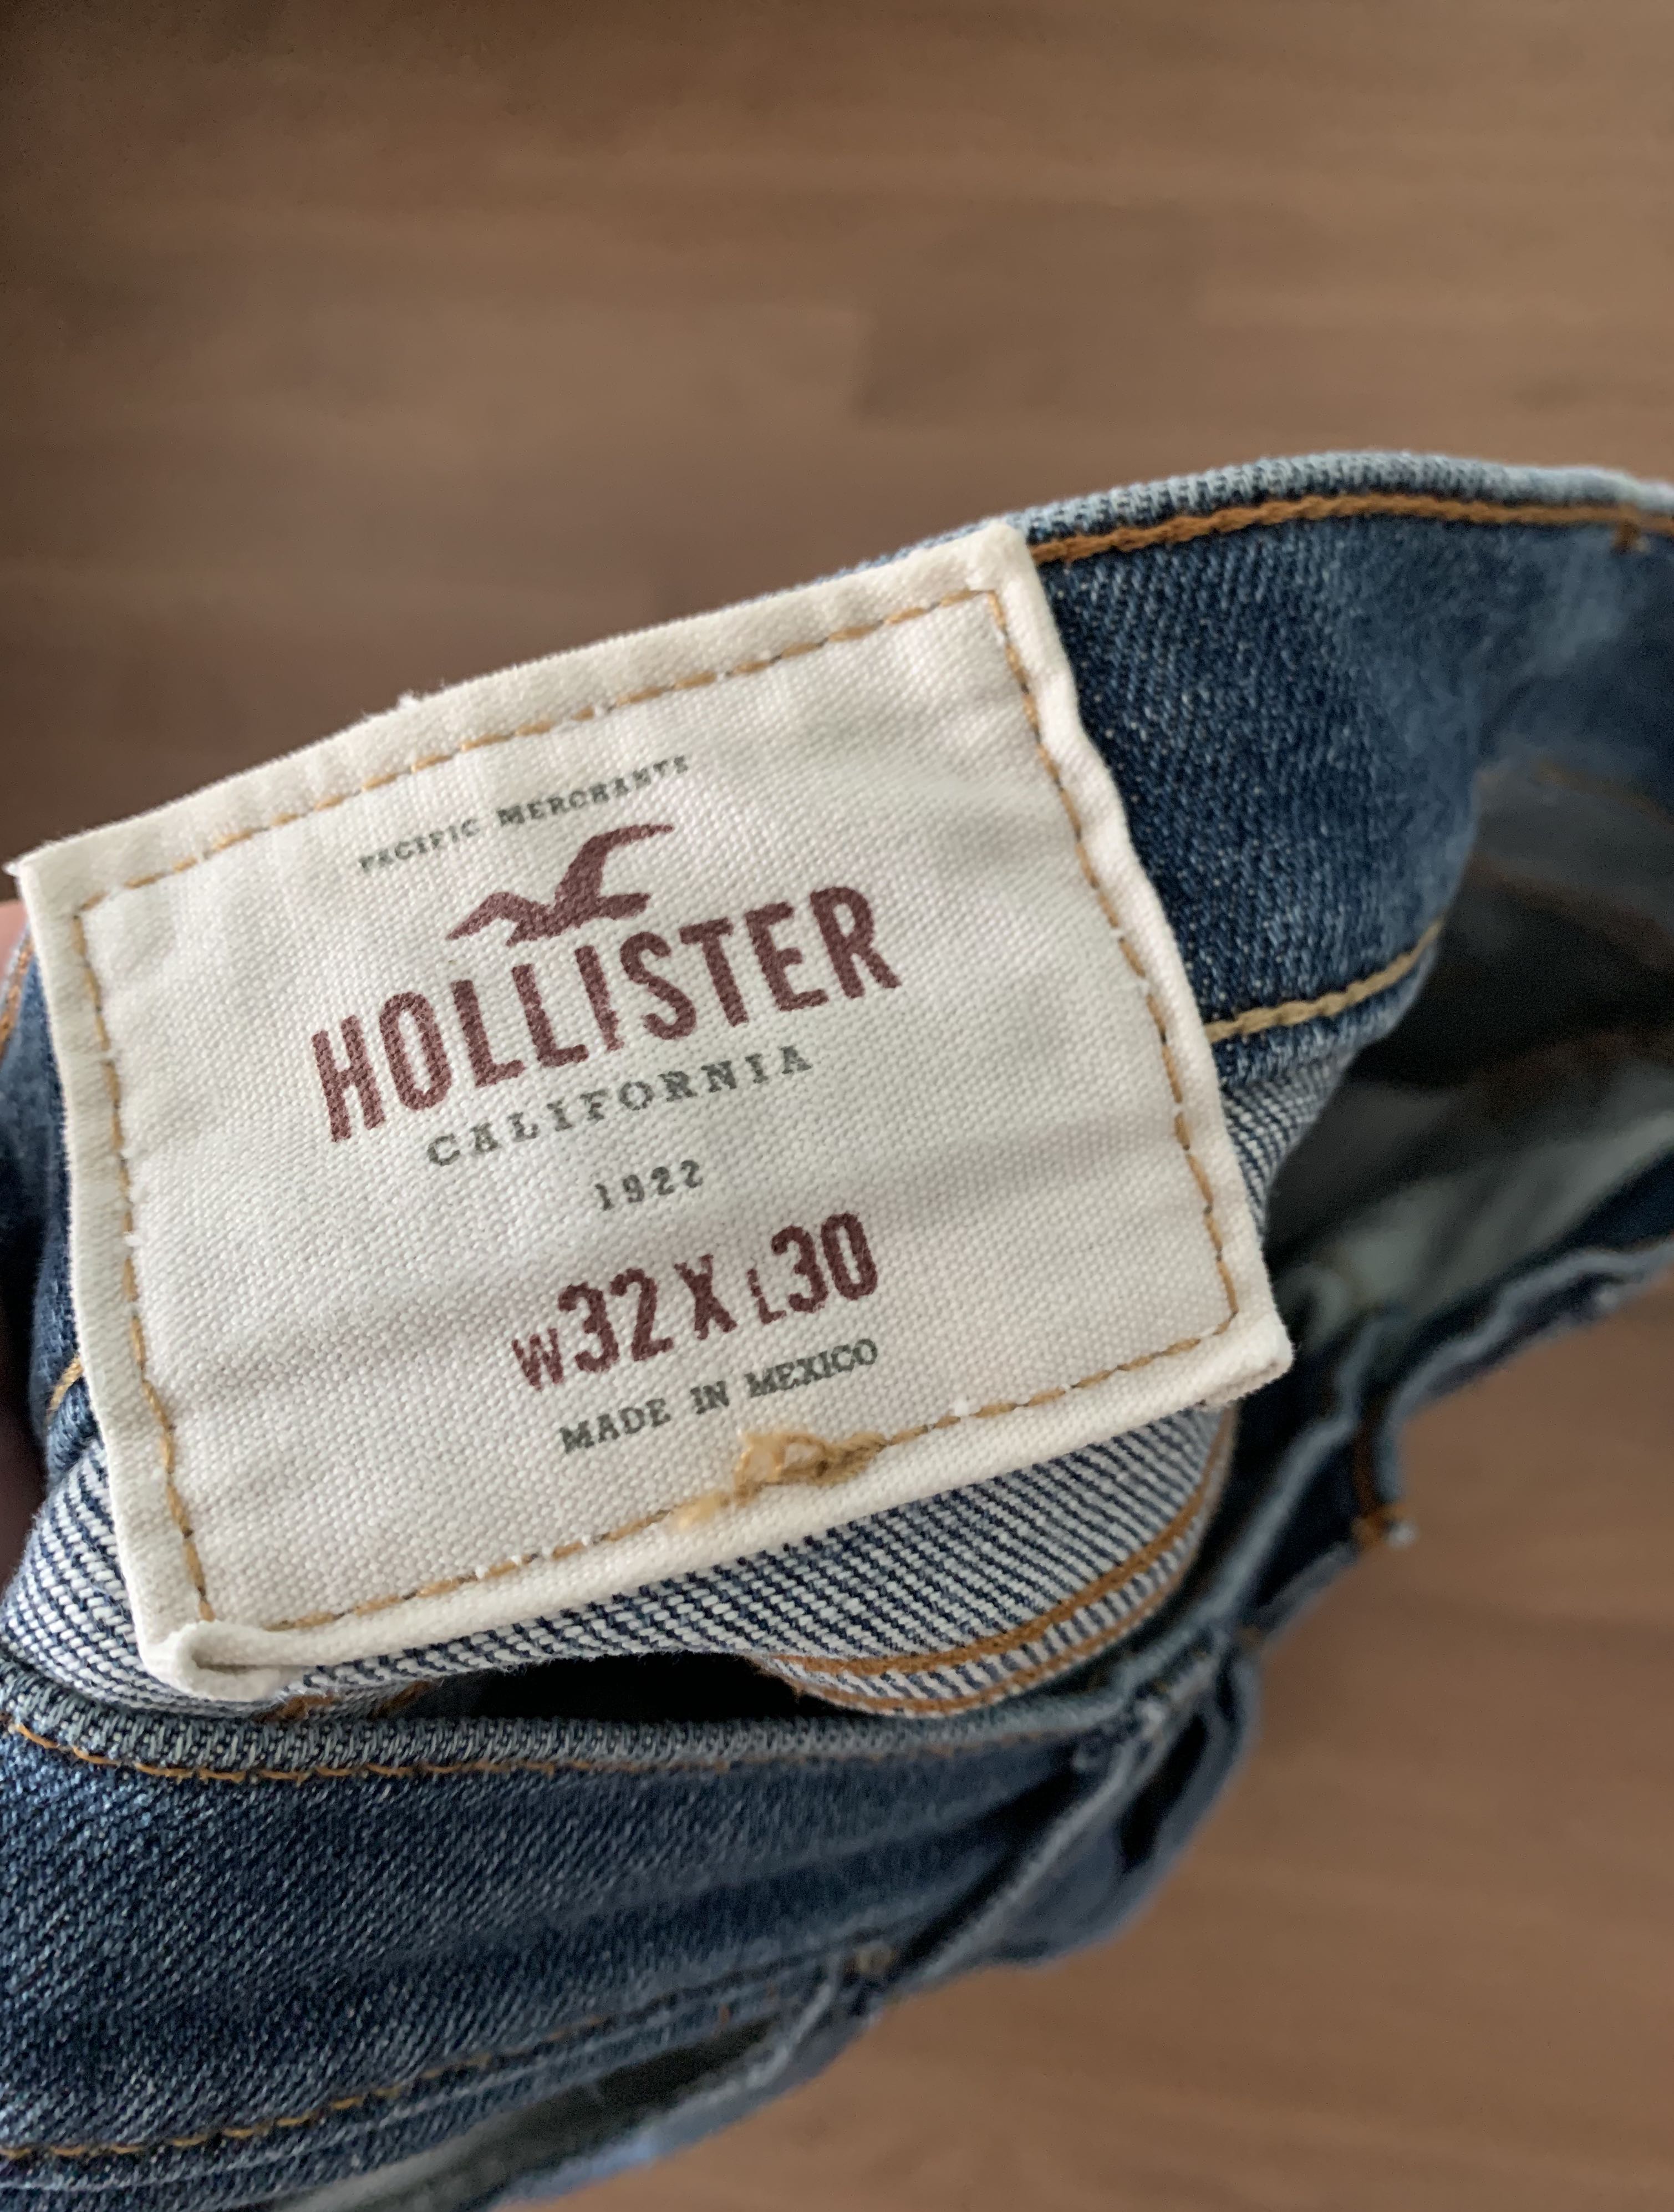 is hollister having a sale on jeans